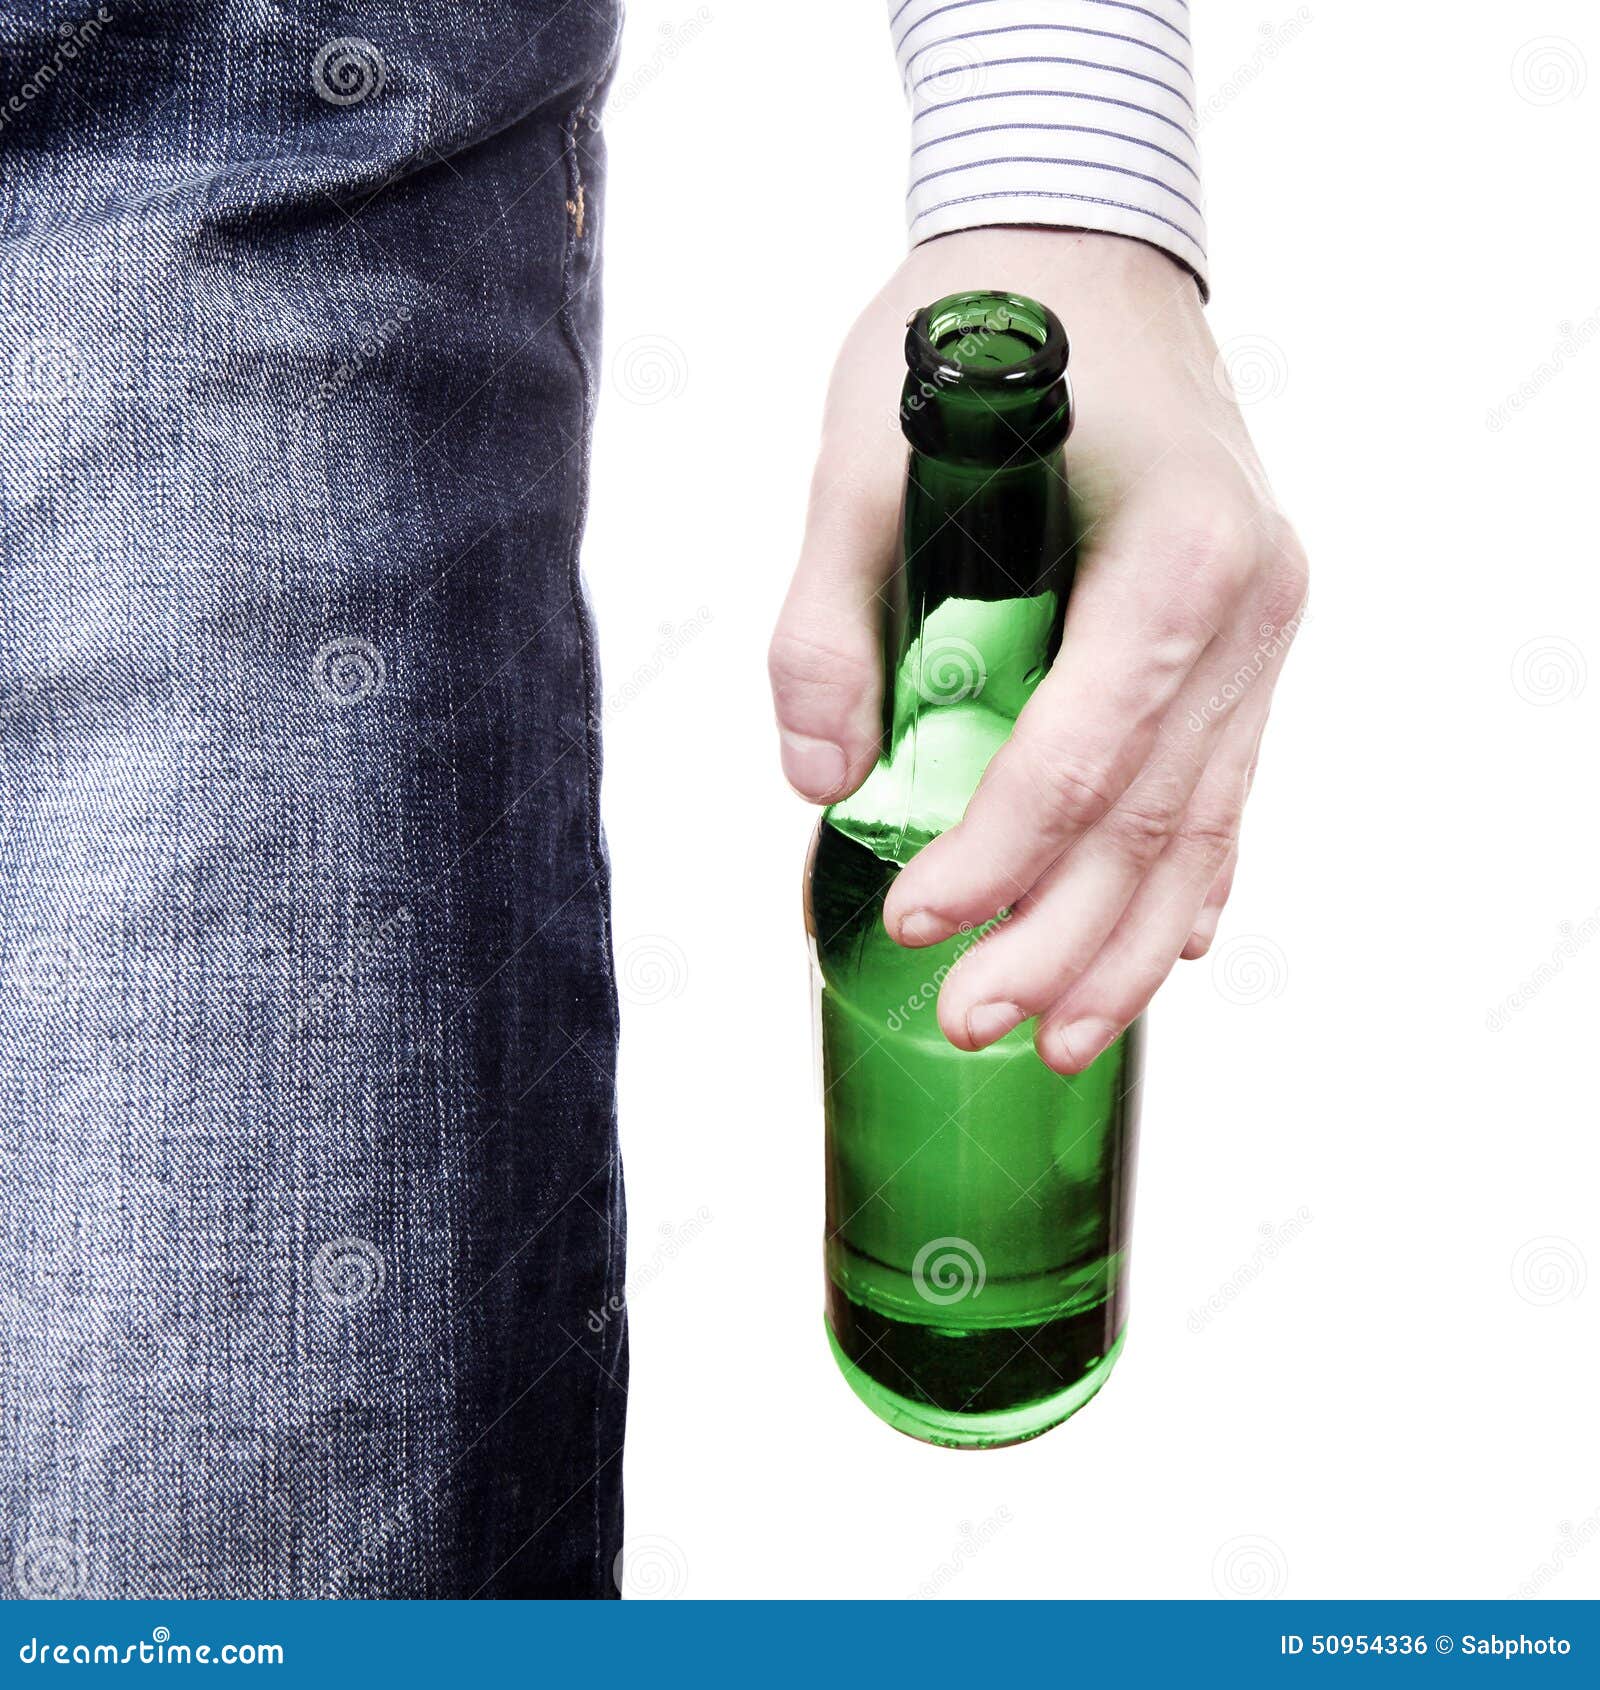 List 90+ Images how to hold a beer bottle Latest